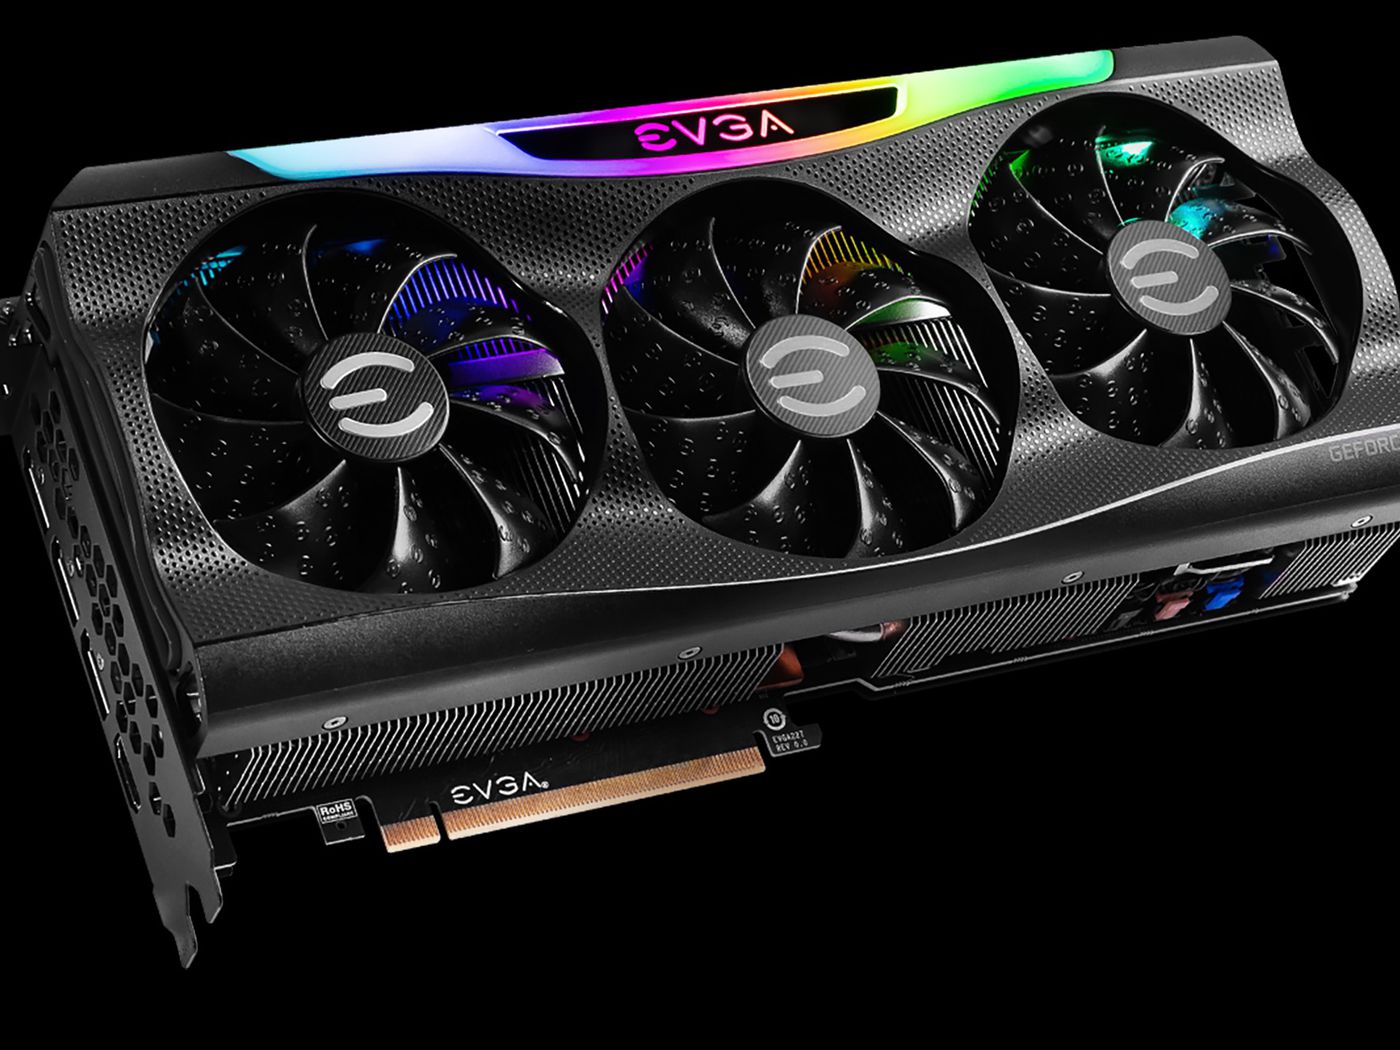 What EVGA's graphics cards for Nvidia and consumers